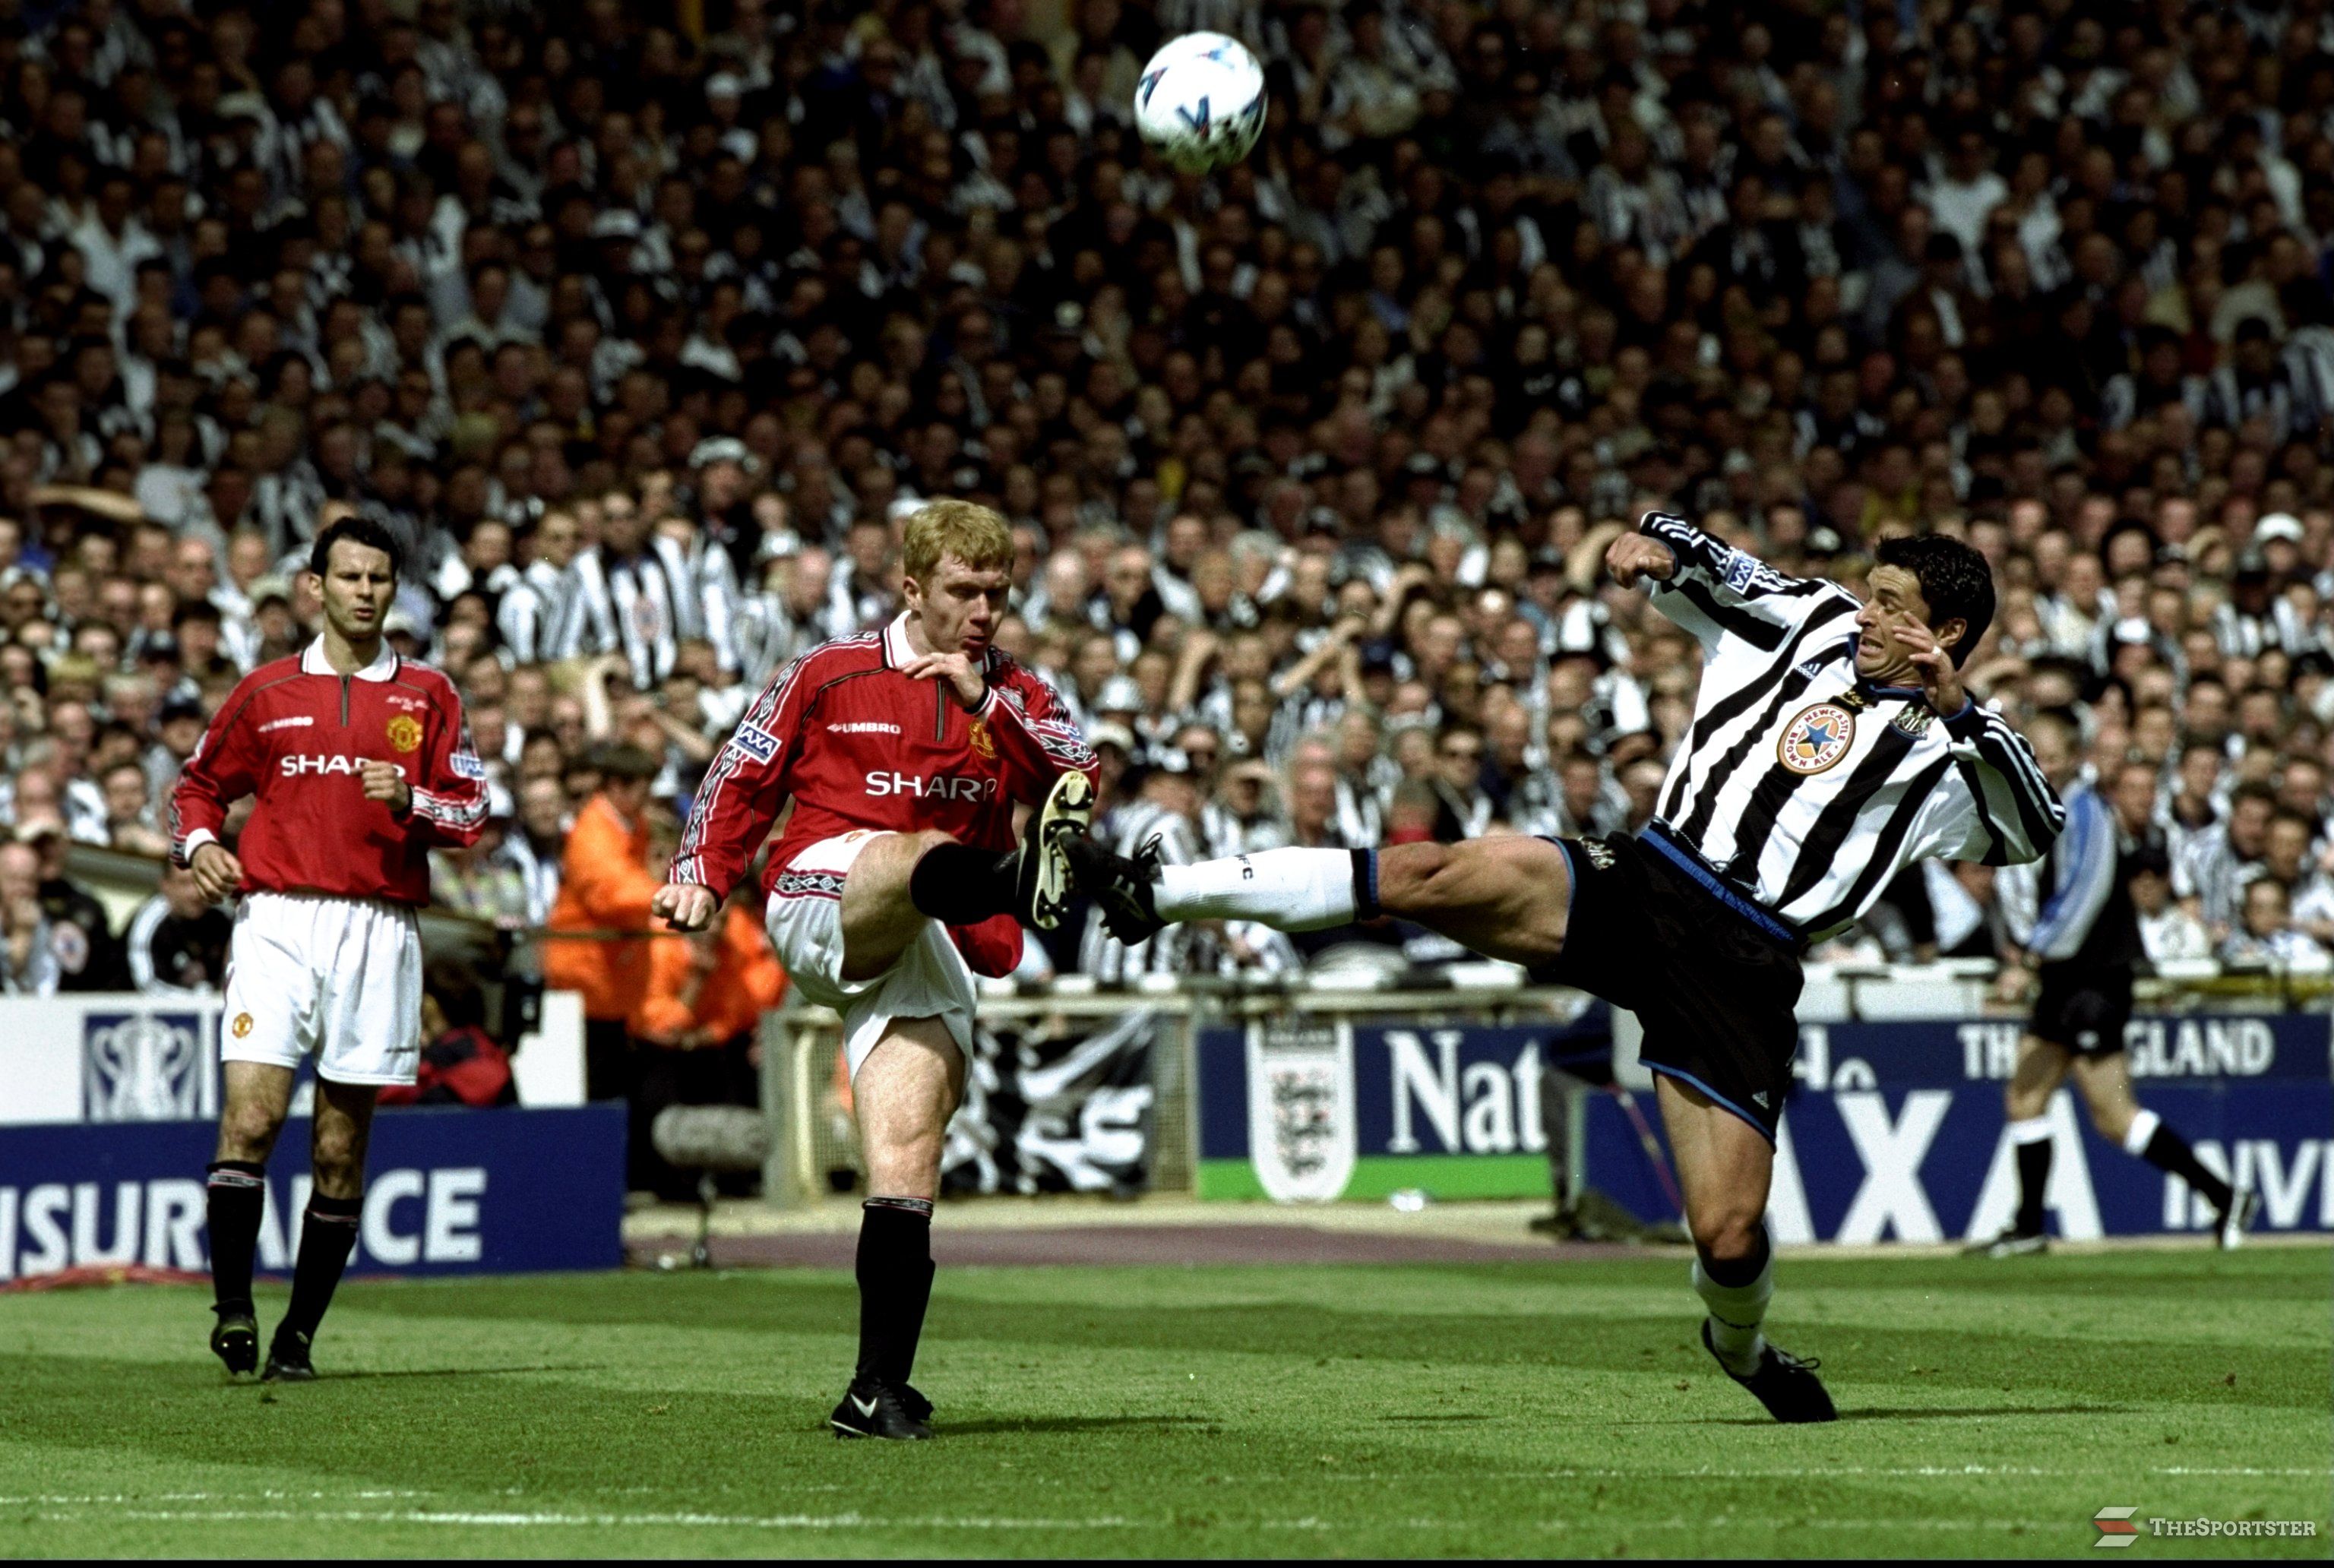 22 May 1999: Gary Speed of Newcastle United in action against Paul Scholes of Manchester United during the AXA FA Cup Final match against Manchester United played at Wembley Stadium in London, England. The match finished in a 2-0 win for Manchester United and they completed the "Double" for the third time in six years. \ Mandatory Credit: Clive Brunskill /Allsport